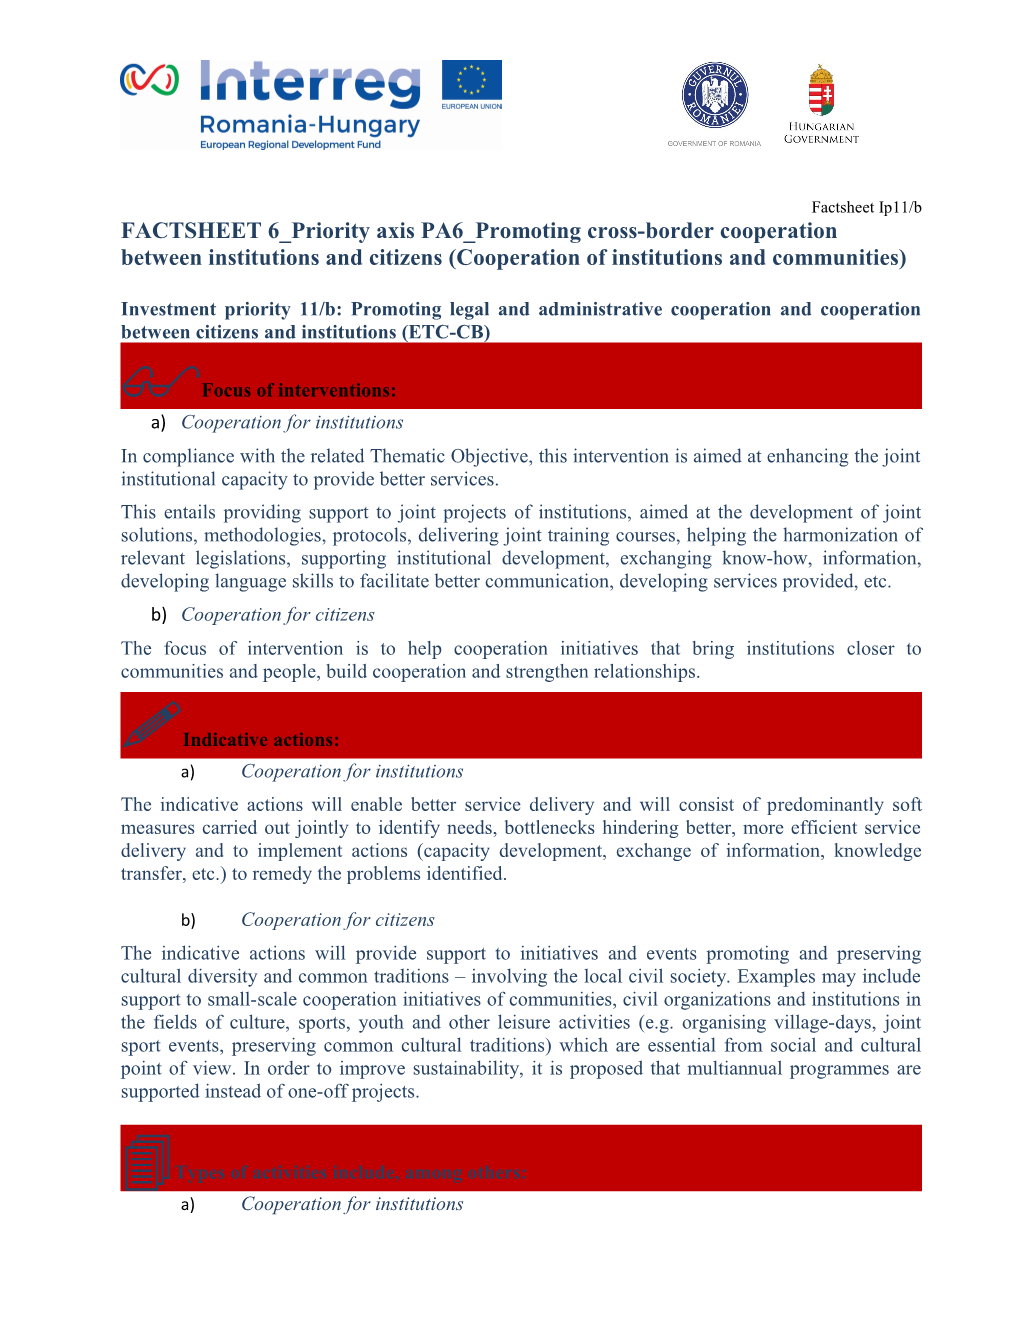 FACTSHEET 6 Priority Axis PA6 Promoting Cross-Border Cooperation Between Institutions